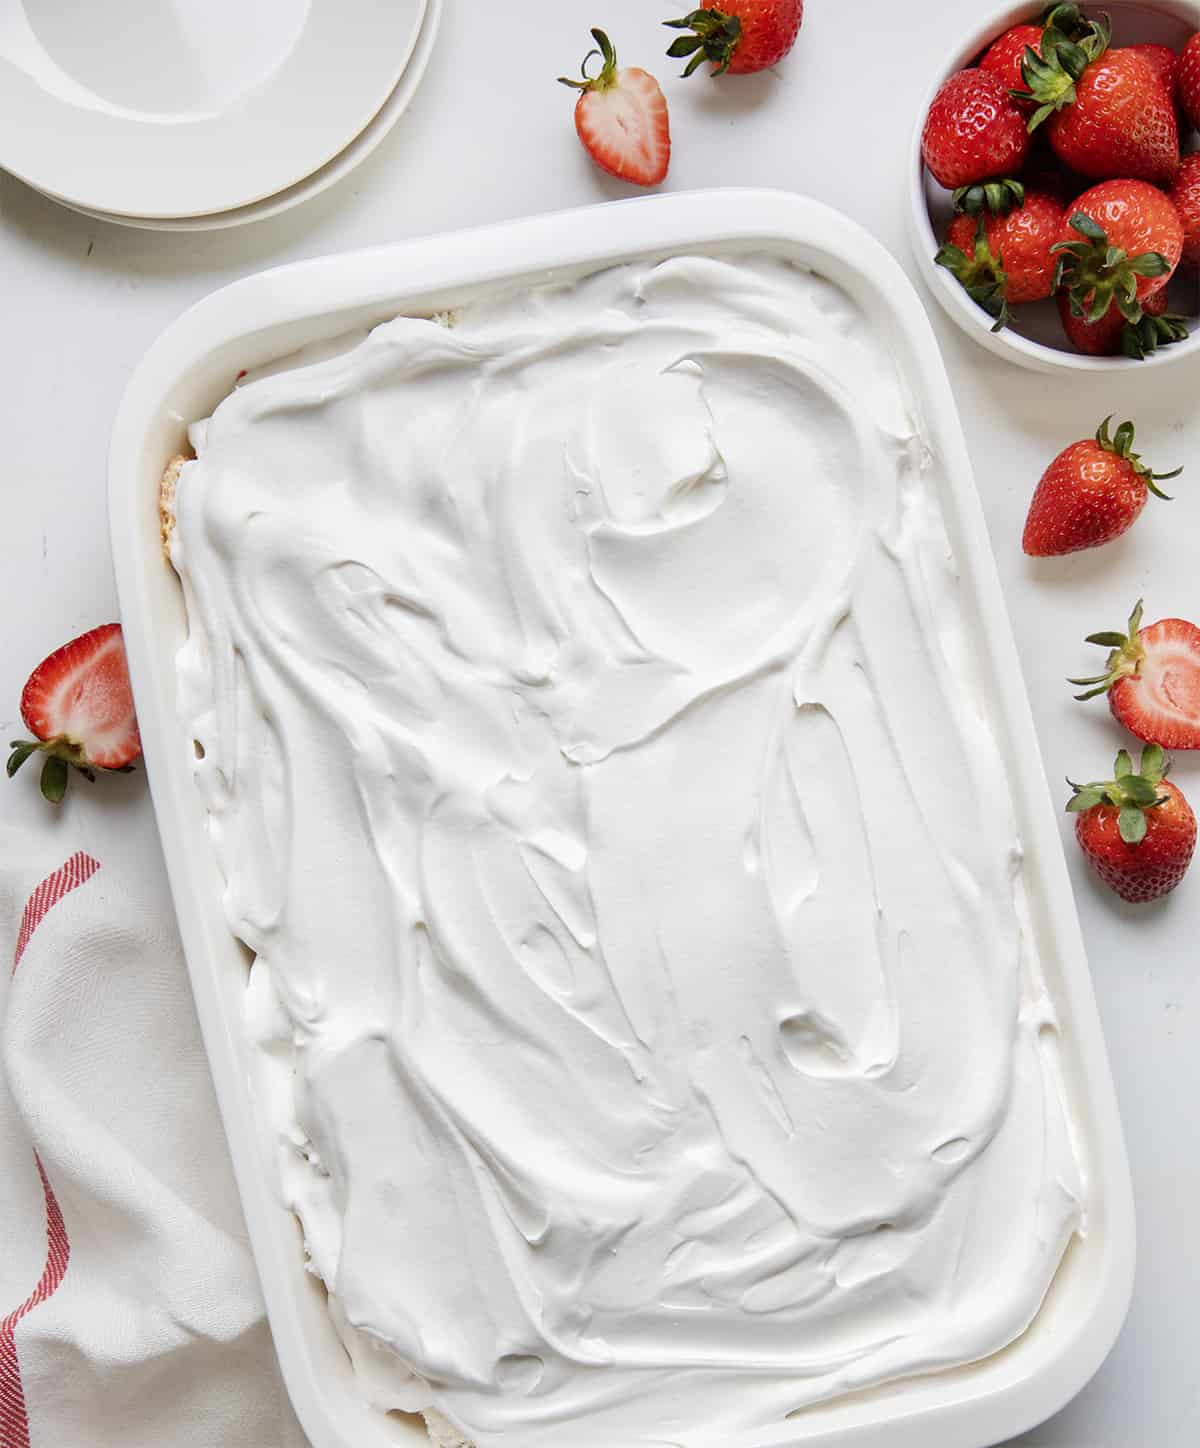 Pan of Strawberry Heaven Dessert covered in whipped cream on a white counter with strawberries around it.